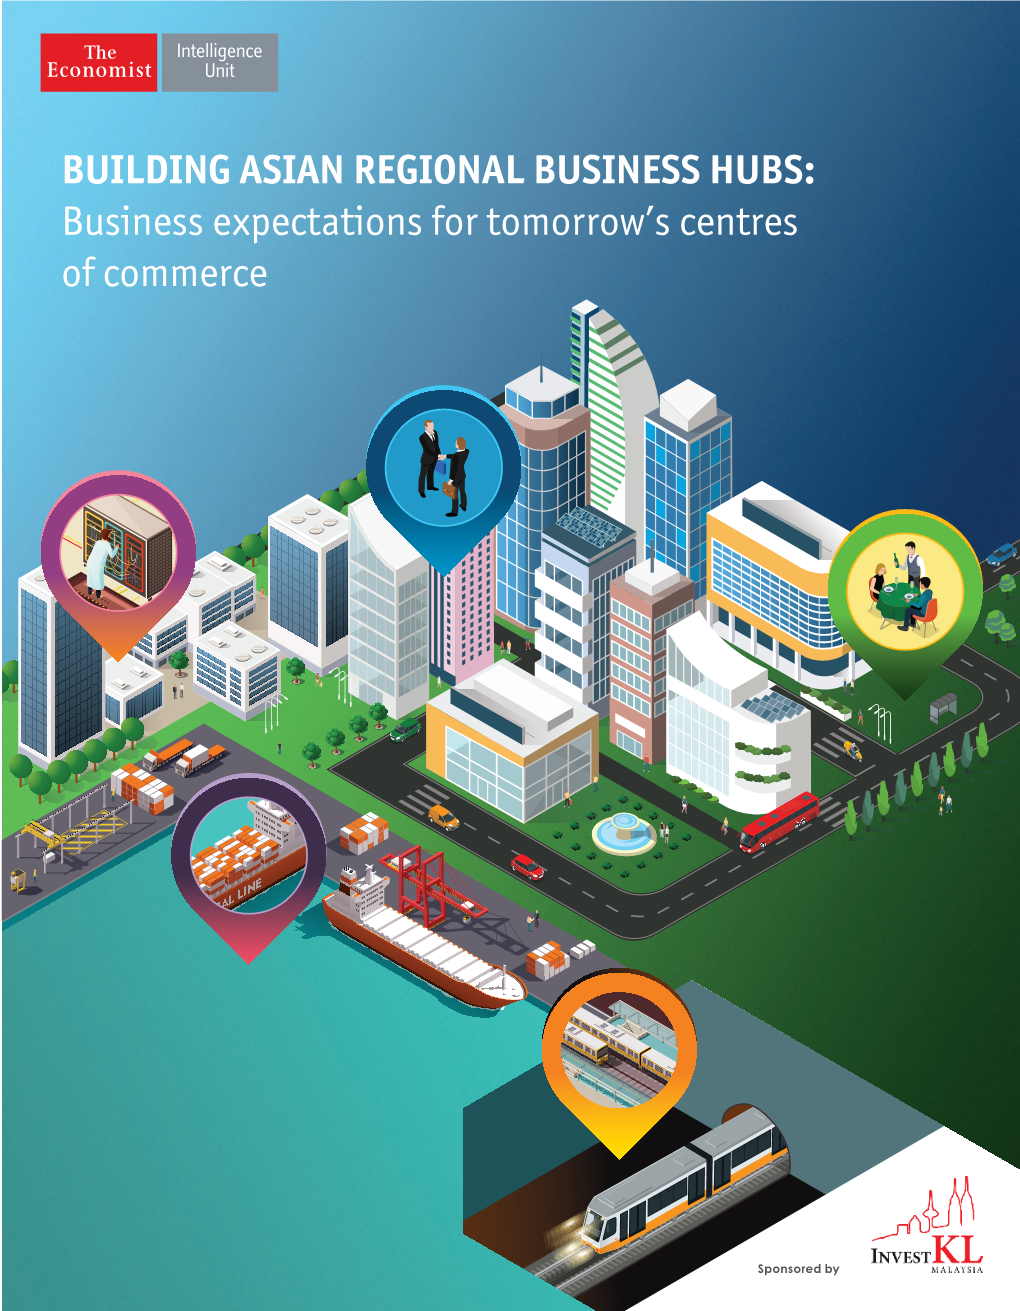 BUILDING ASIAN REGIONAL BUSINESS HUBS: Business Expectations for Tomorrow’S Centres of Commerce